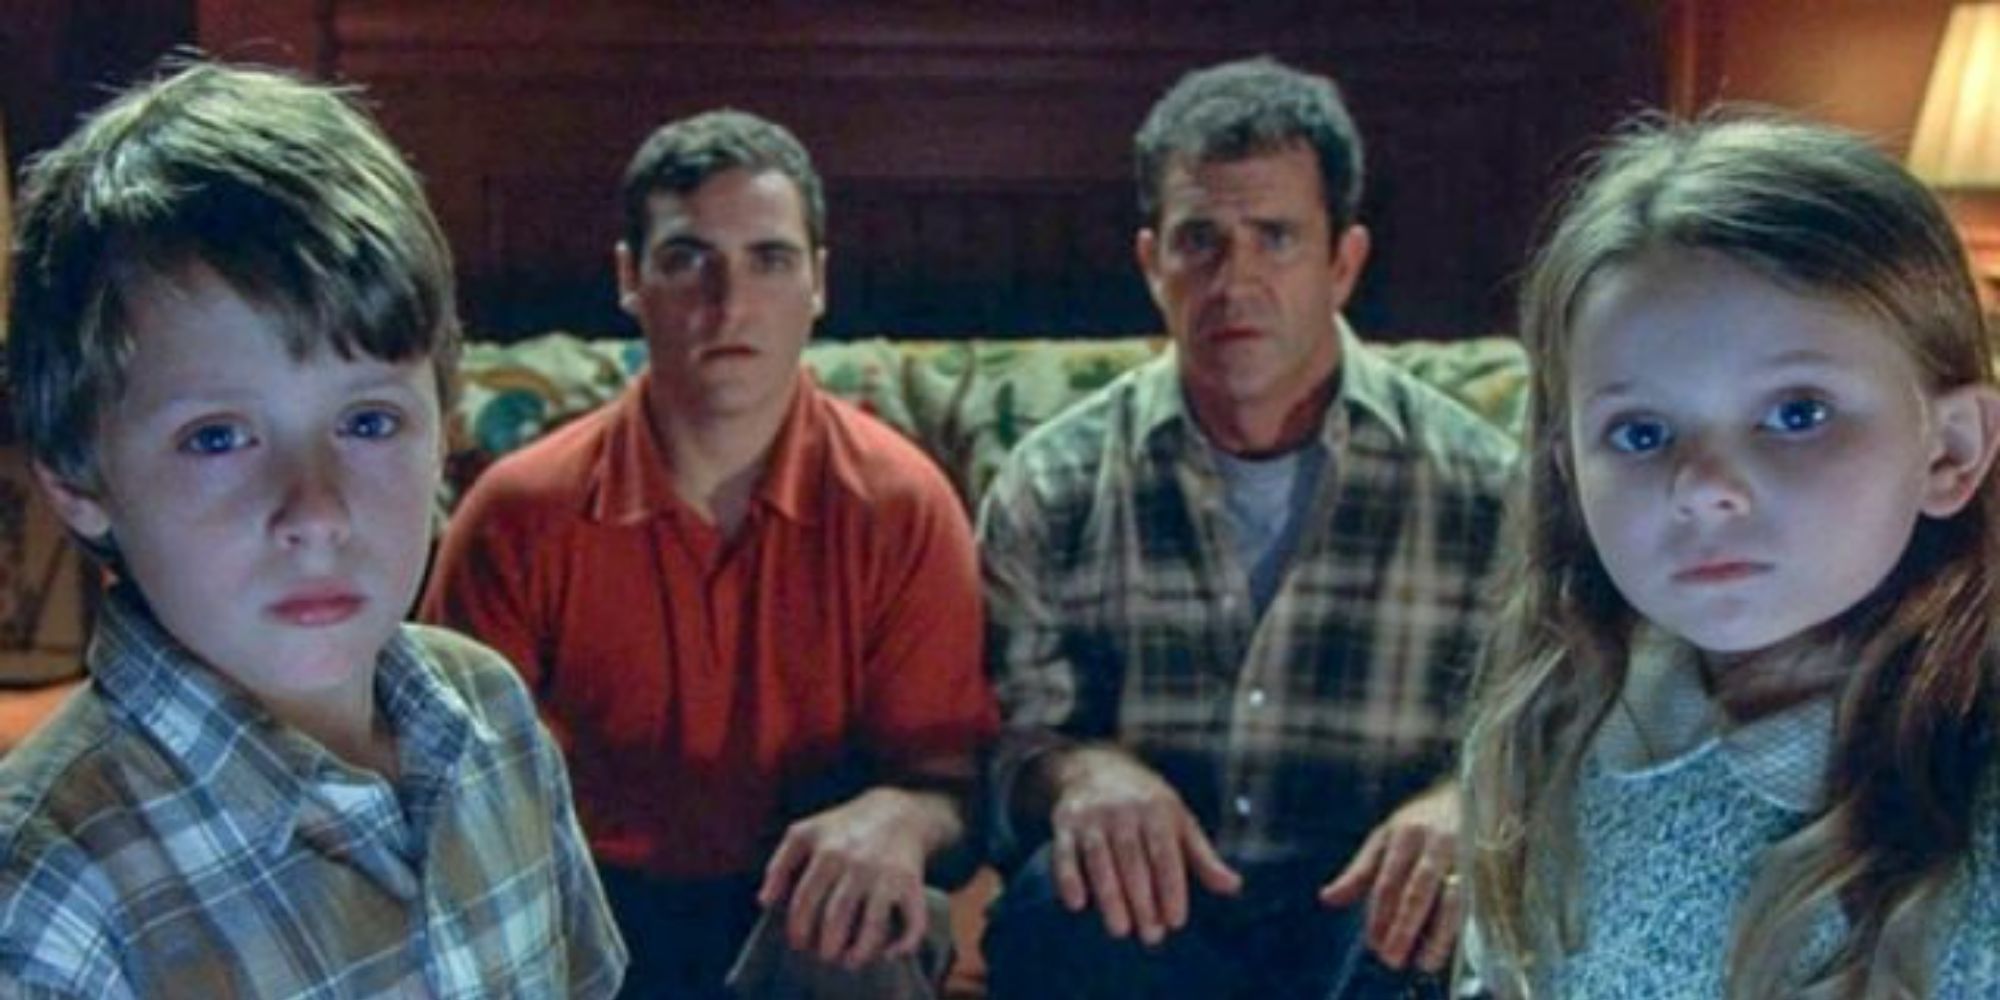 Mel Gibson's Graham, Joaquin Phoenix's Merrill, Rory Culkin's Morgan, and Abigail Breslin's Bo stare at a TV screen while sitting in Signs